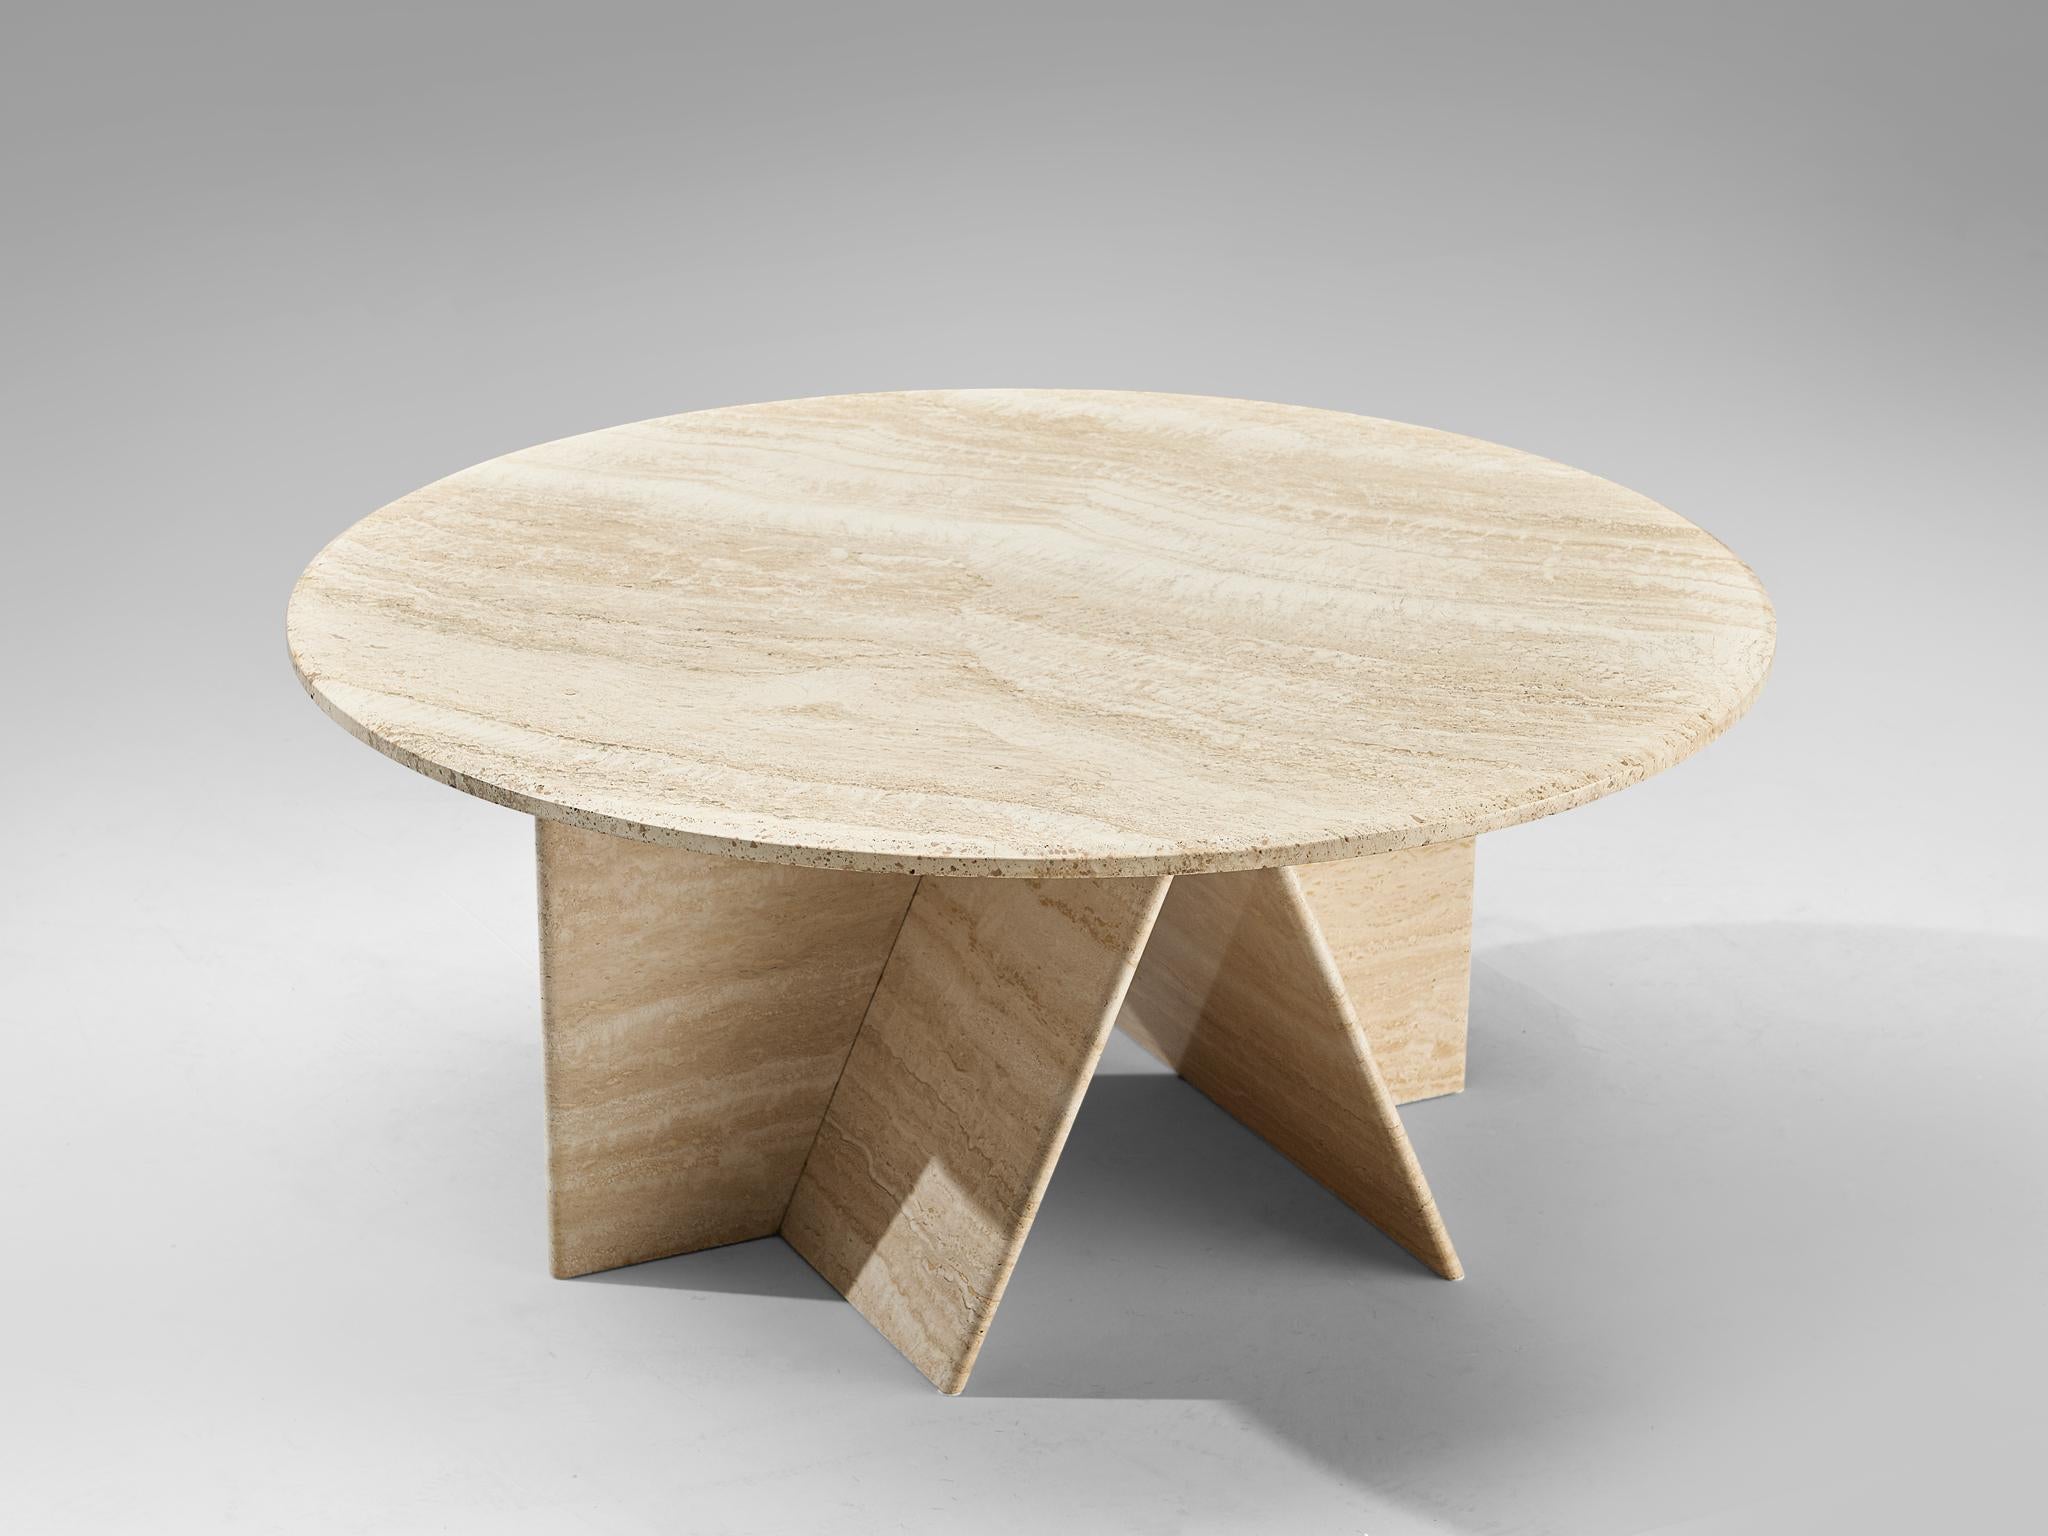 Round coffee table, travertine, Italy, 1970s

This coffee table is fully made out of bright travertine which gives it a sculptural look. The natural lines of the limestone structure the surface. The round tabletop lays on a geometric base with two